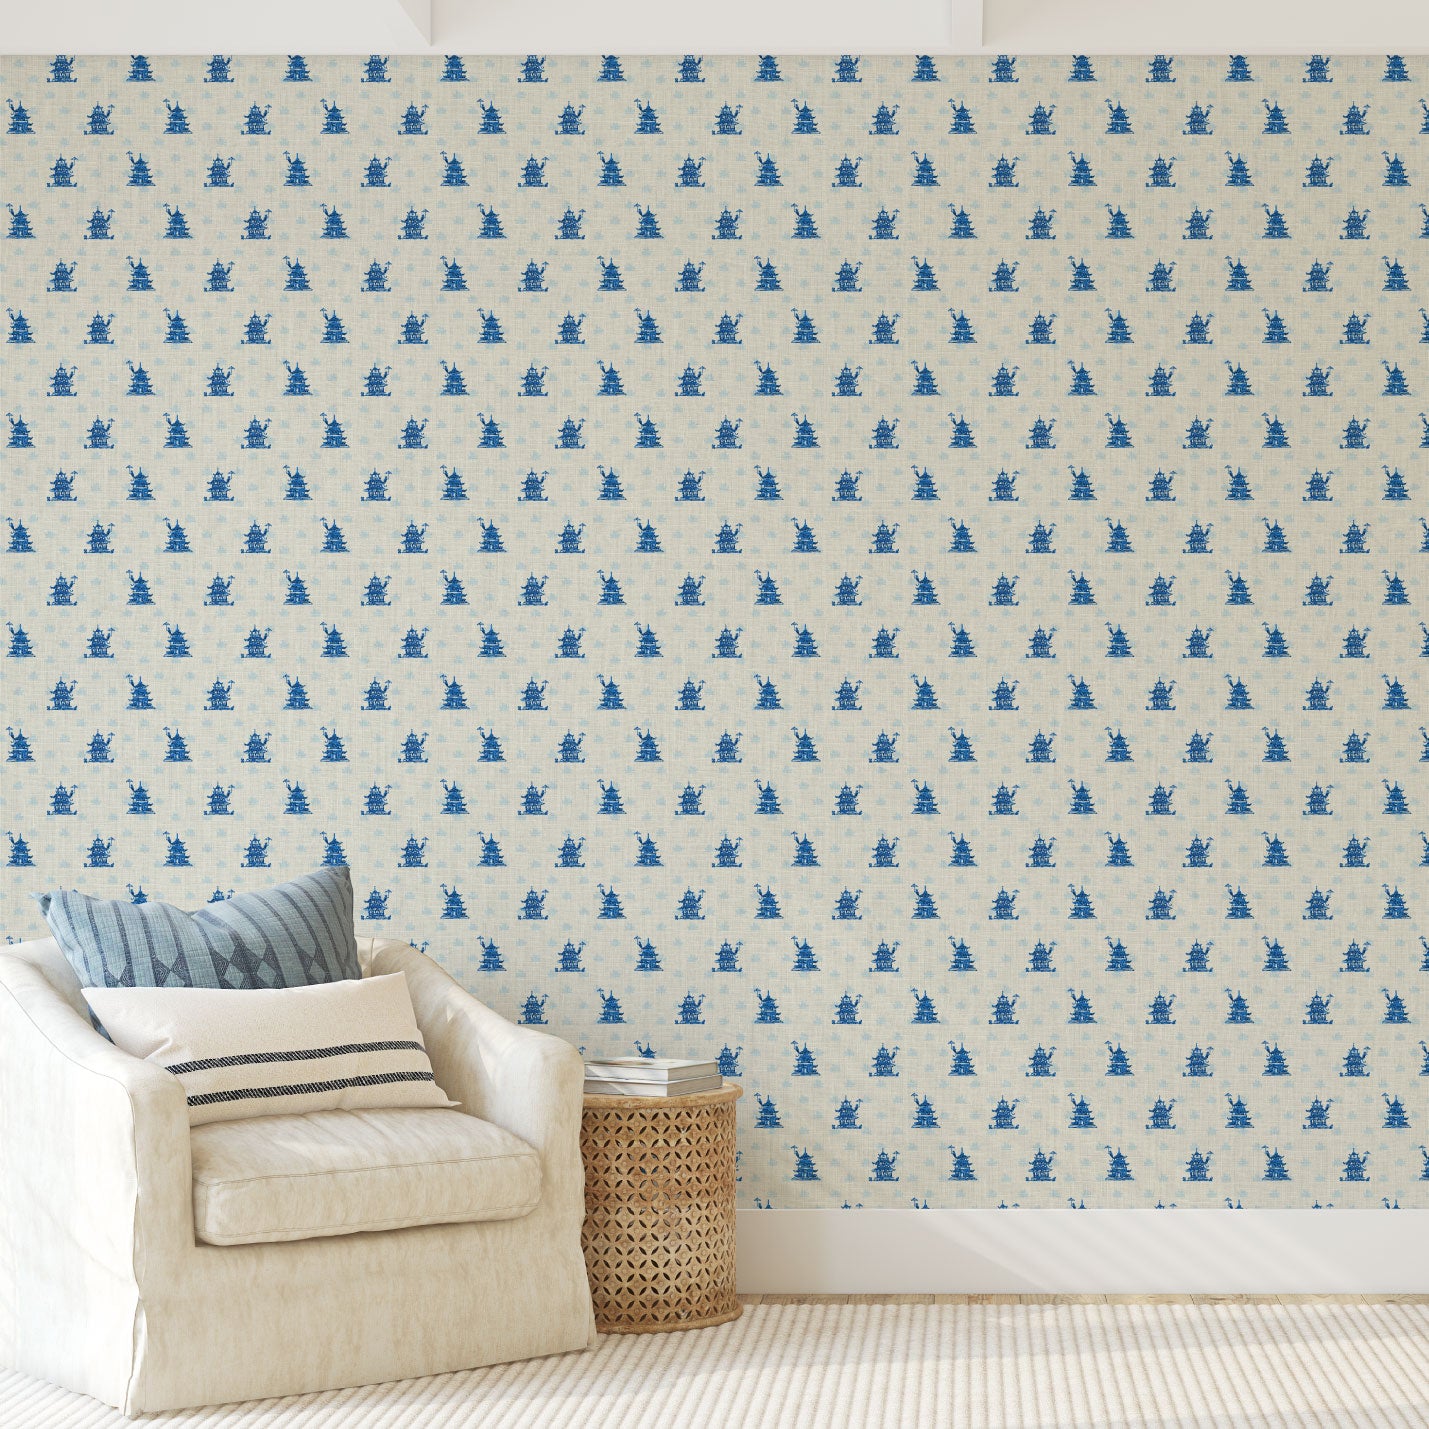 wallpaper Natural Textured Eco-Friendly Non-toxic High-quality Sustainable Interior Design Bold Custom Tailor-made Retro chic Grandmillennial Maximalism Traditional Dopamine decor french blue cream royal off-white chintz chinoiserie asian inspired pagoda chinese stripe geo geometric linen